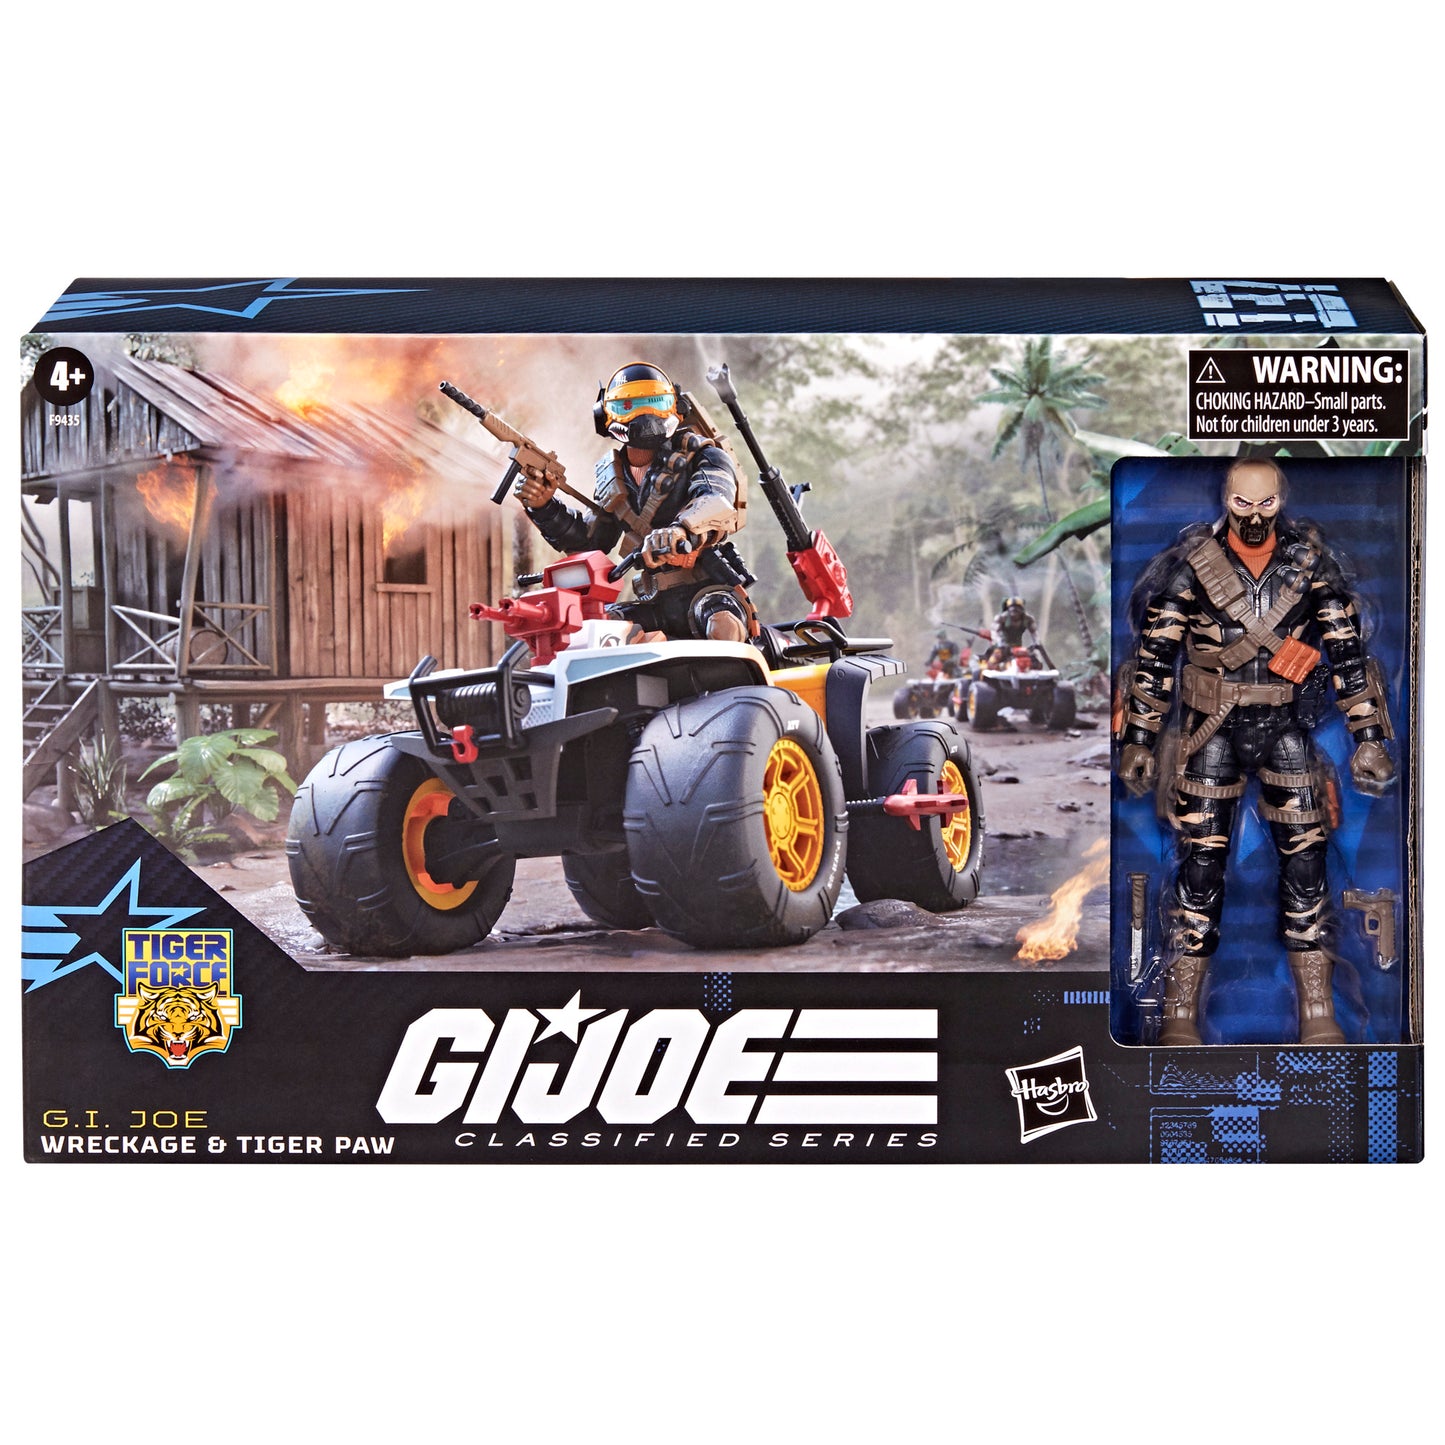 G.I. Joe Classified Series #137, Tiger Force Wreckage & Tiger Paw ATV, Vehicle and Action Figure Set